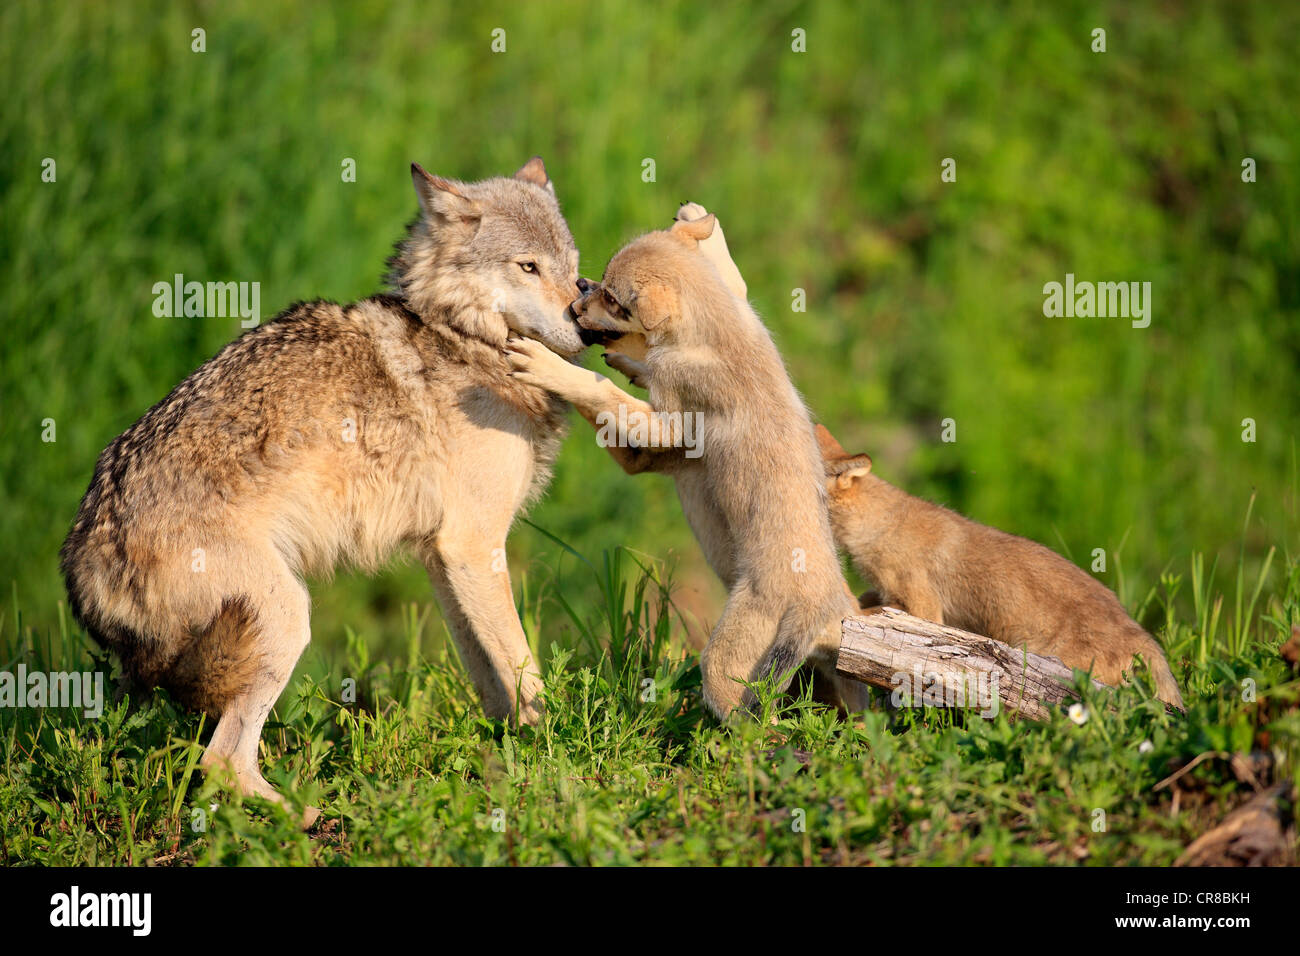 Wolf (Canis lupus), cubs begging their mother for food, social behavior, Minnesota, USA, North America Stock Photo